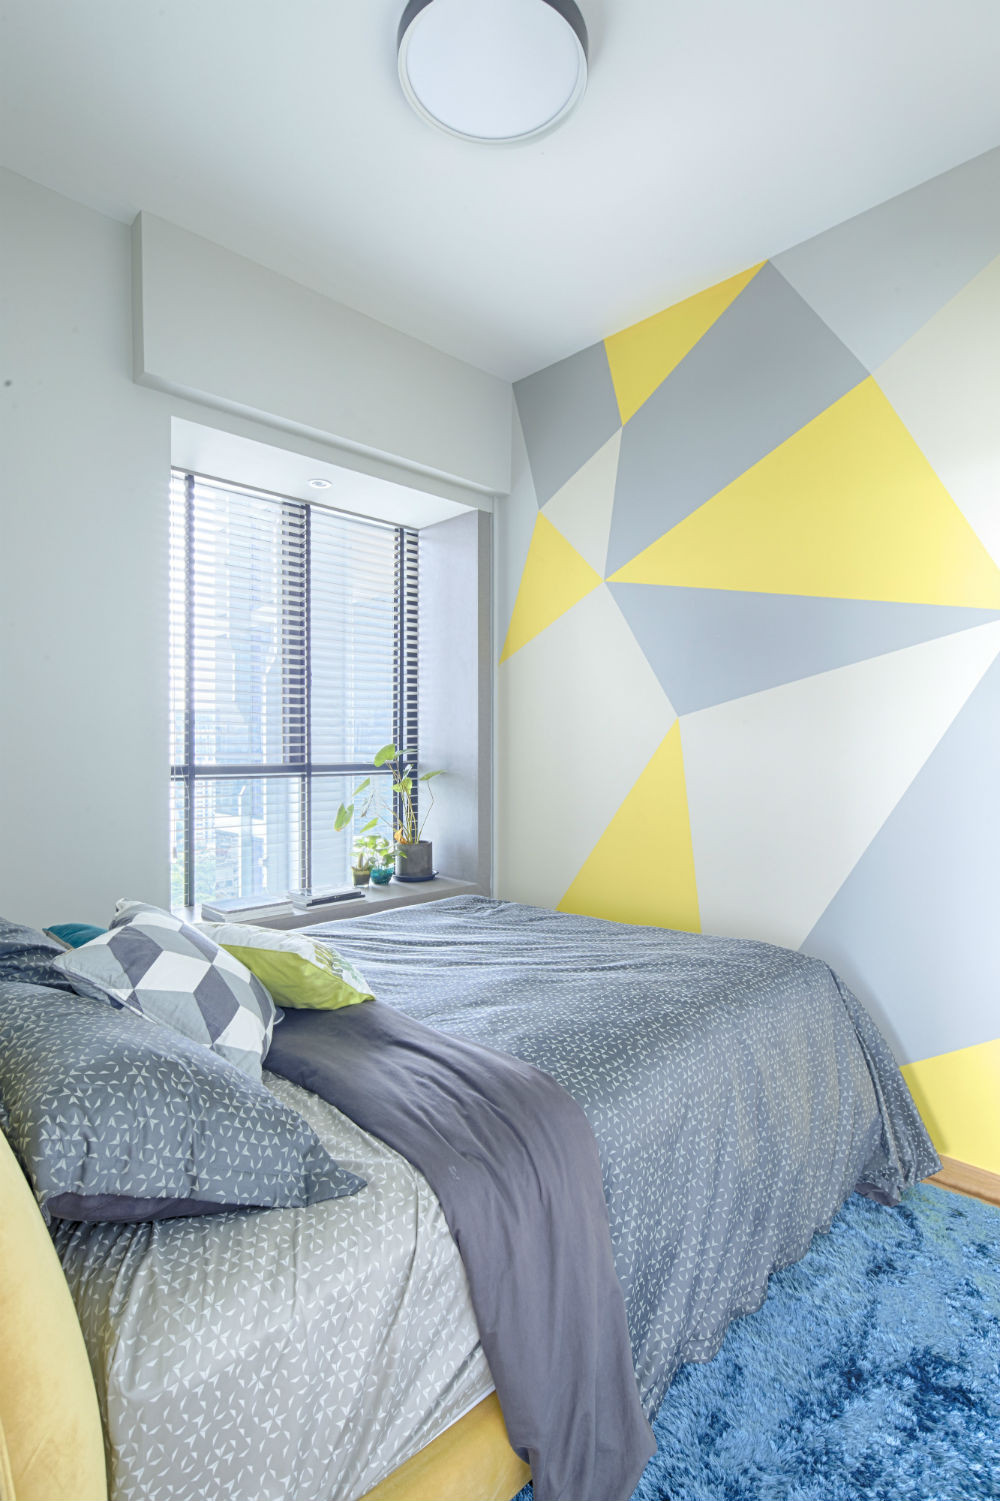 Wall Paints For Bedroom
 A great DIY paint idea for your walls